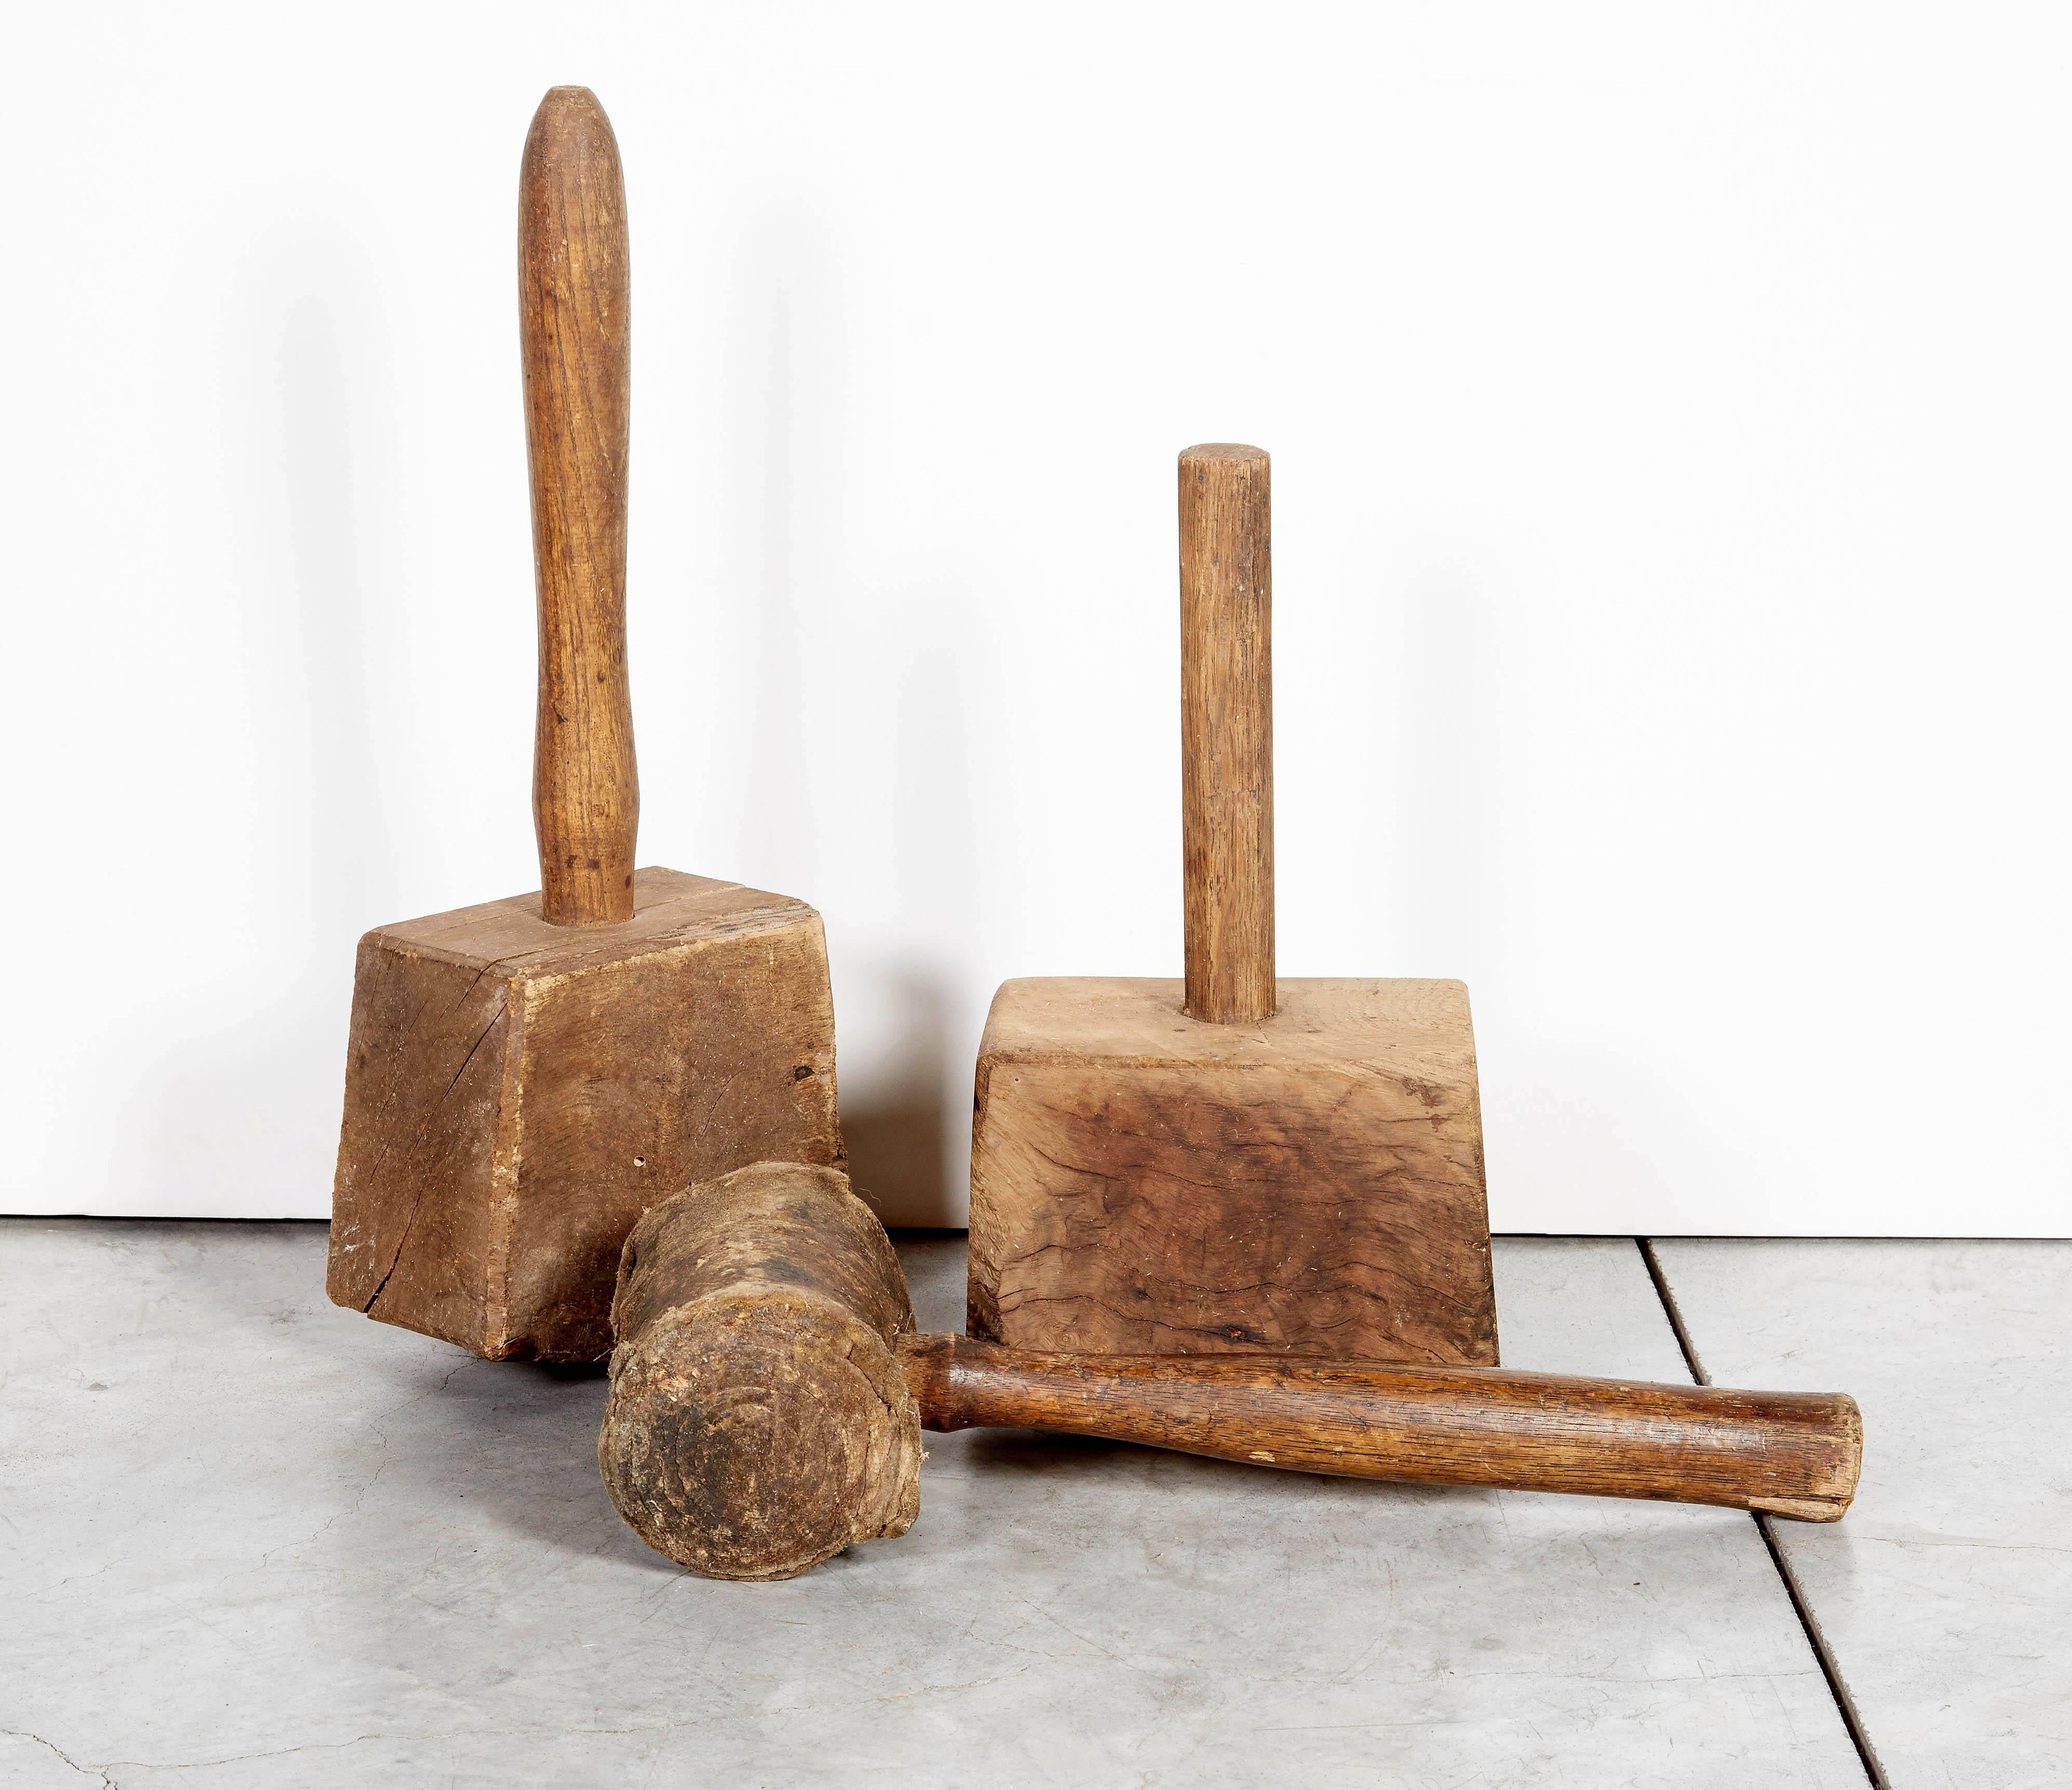 Beautifully worn early American sturdy wood mallet.
(Two have been sold, only one available - the RIGHT one in the main image).
